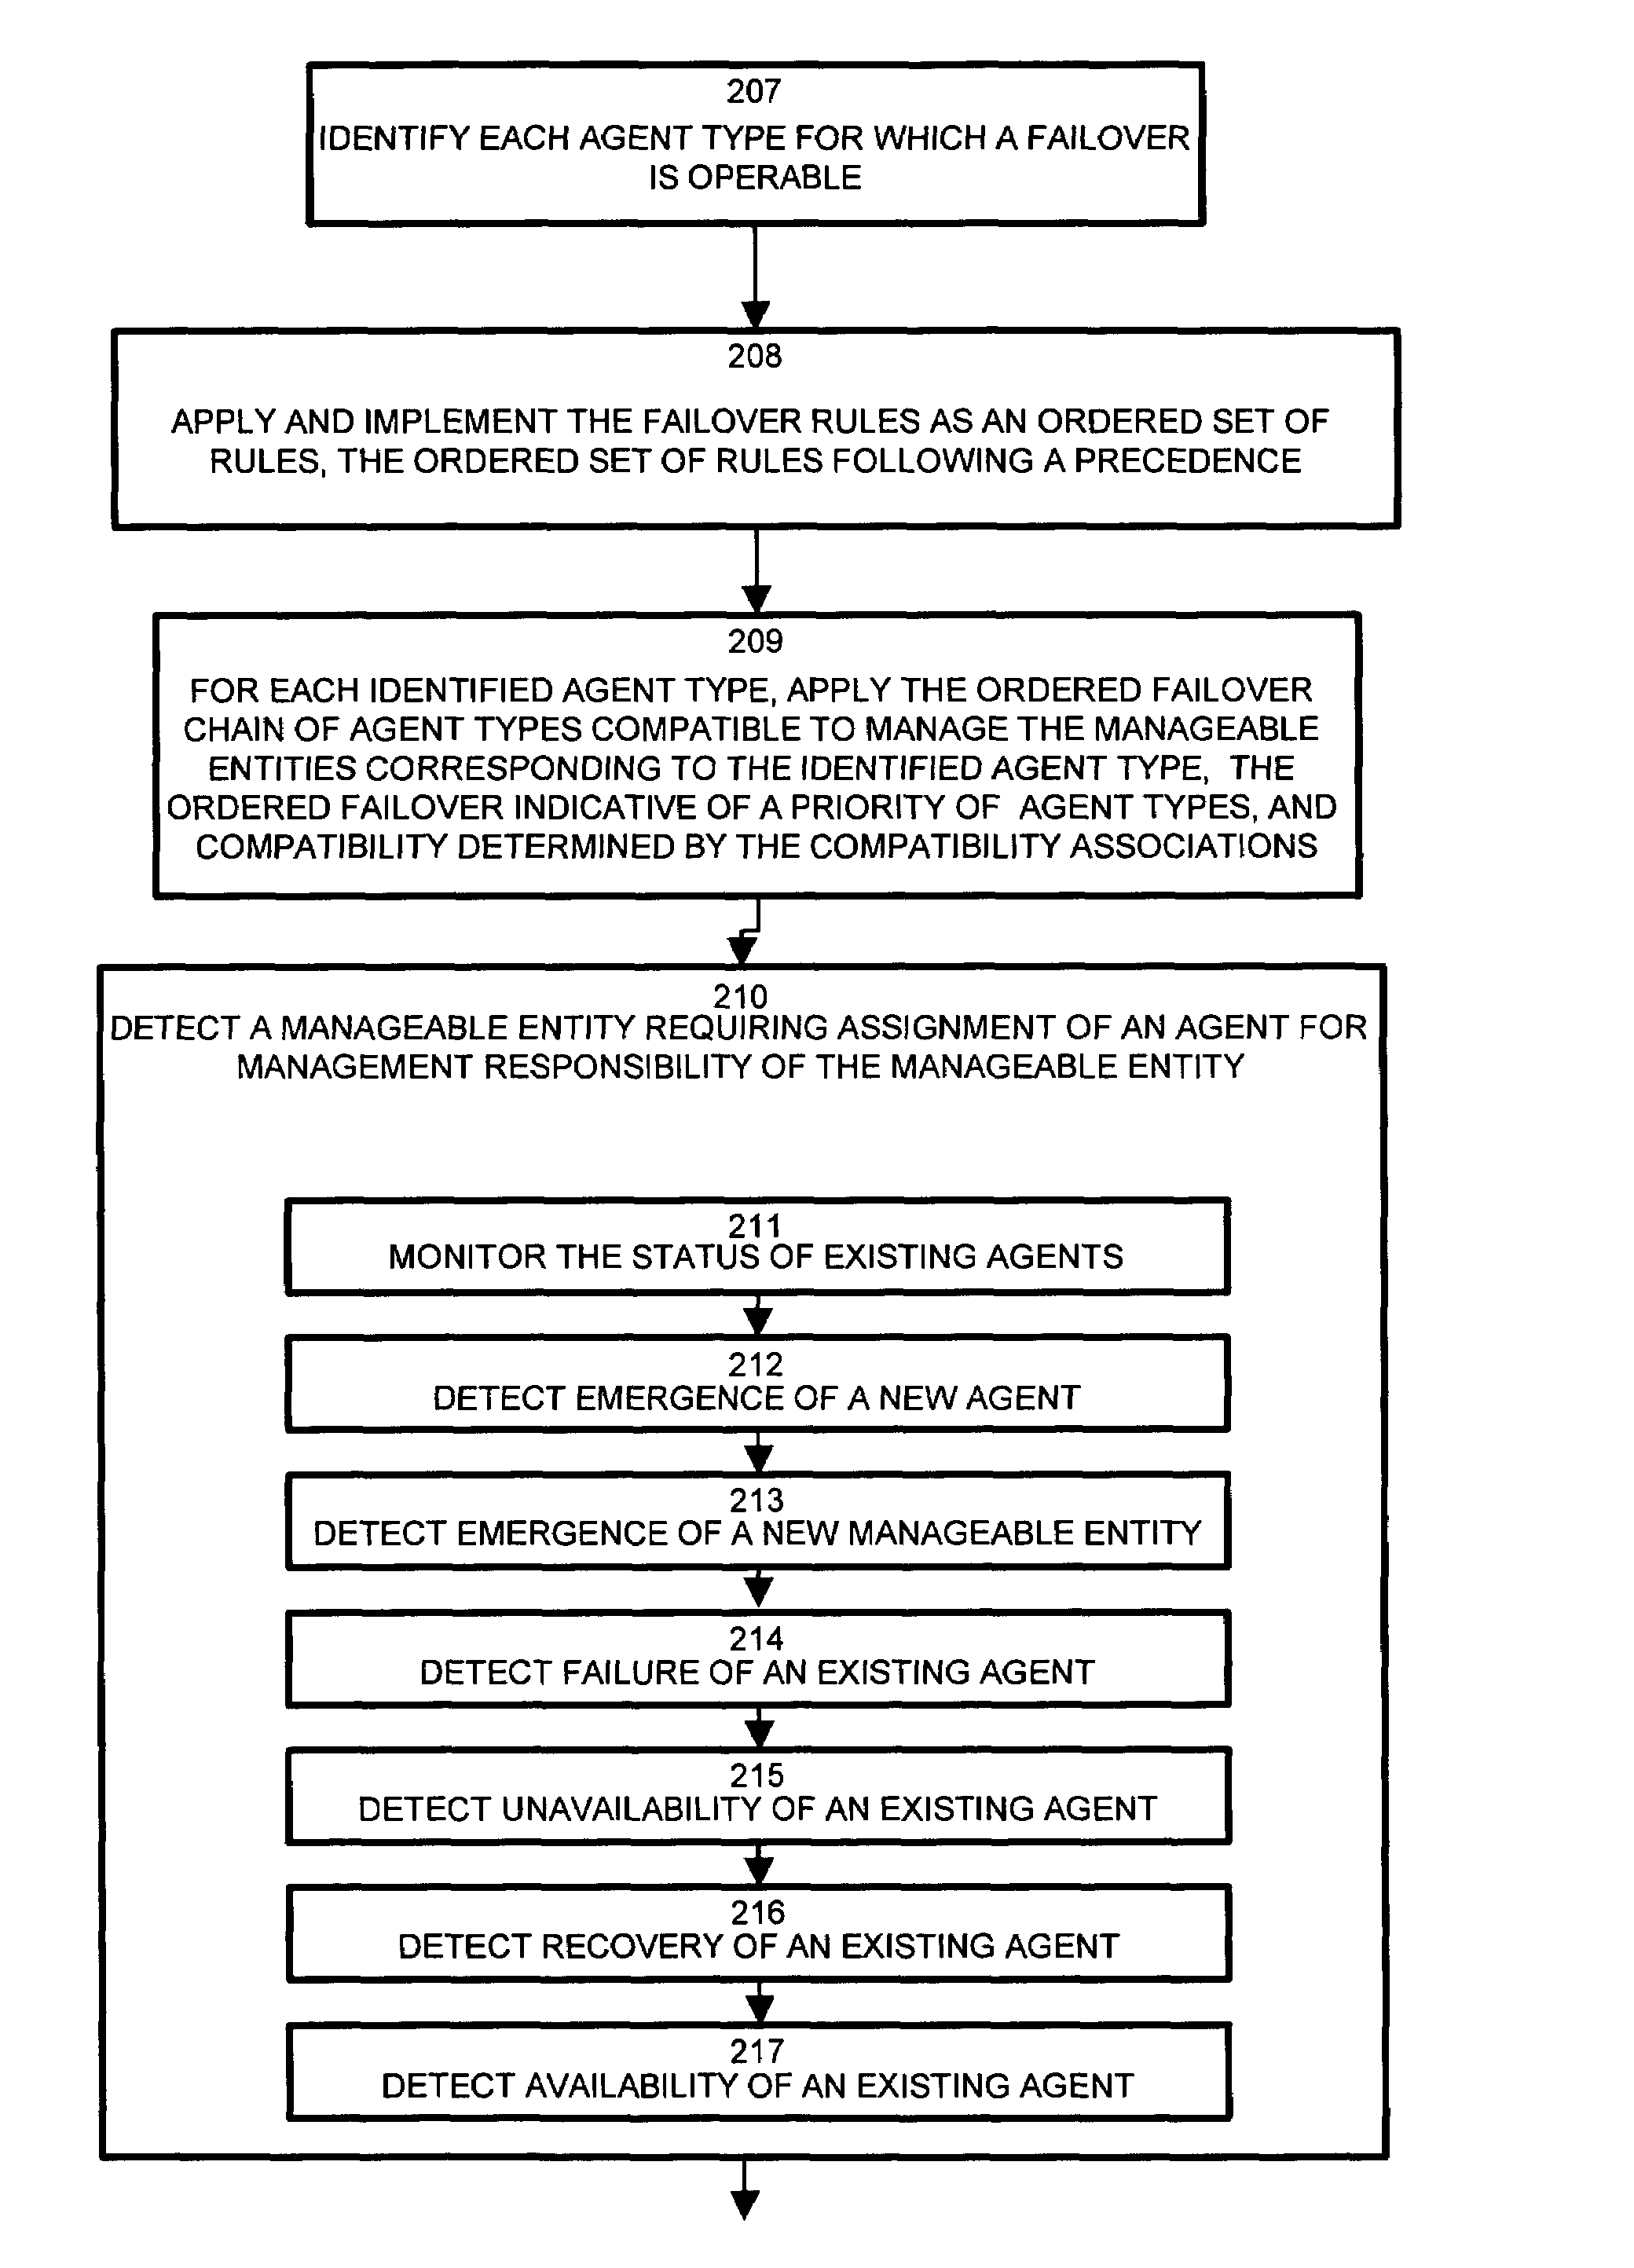 System and methods for failover management of manageable entity agents